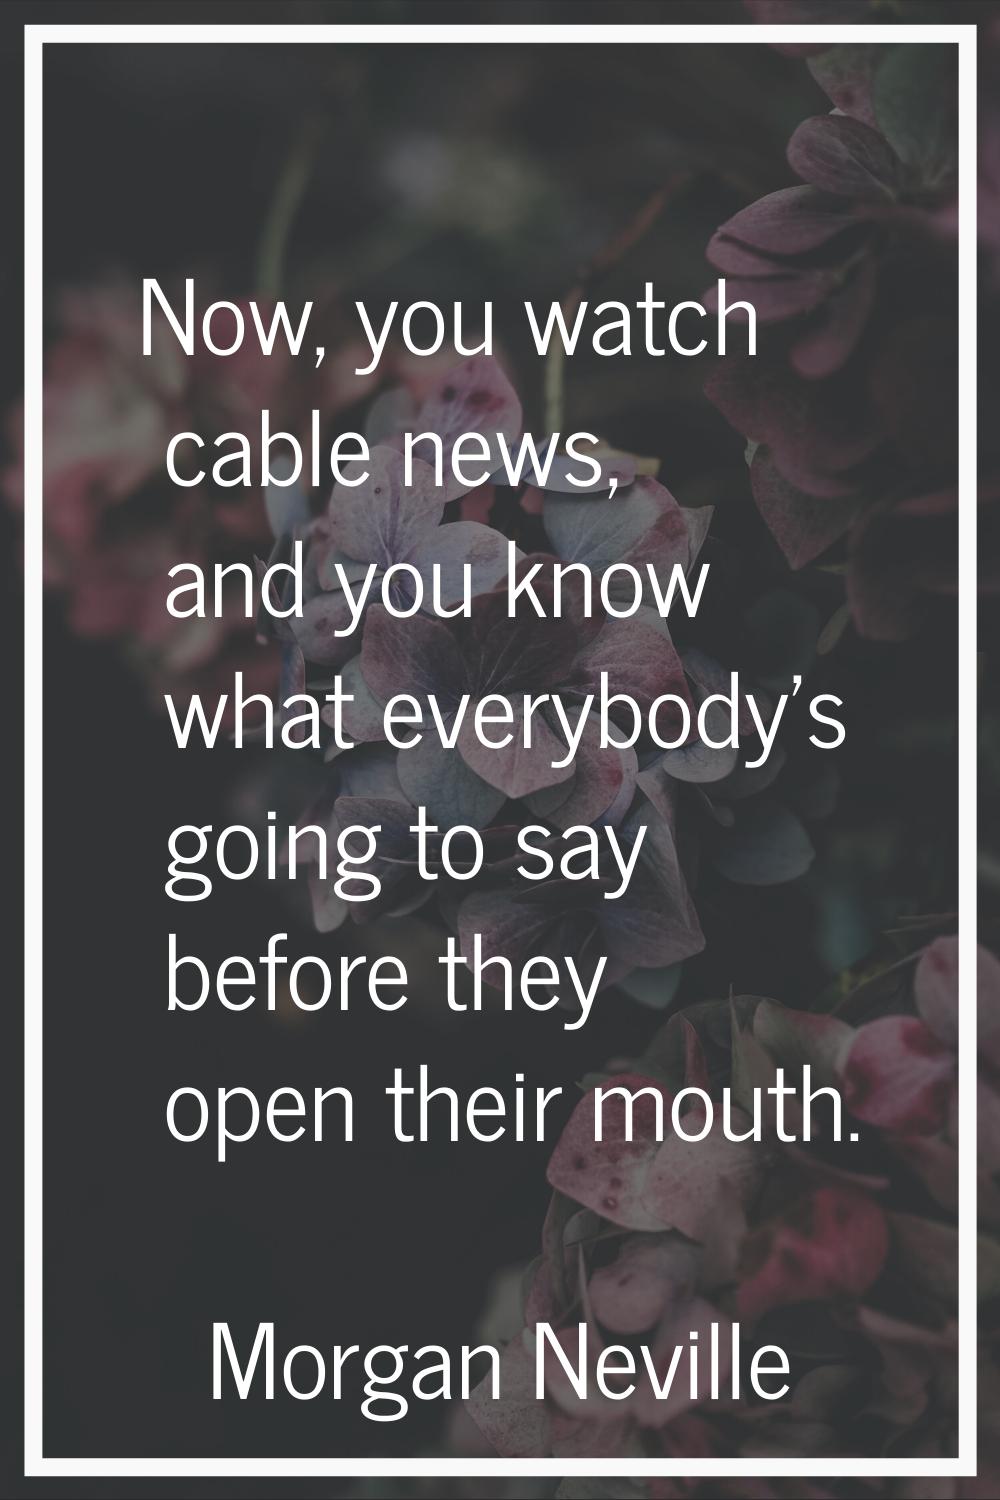 Now, you watch cable news, and you know what everybody's going to say before they open their mouth.